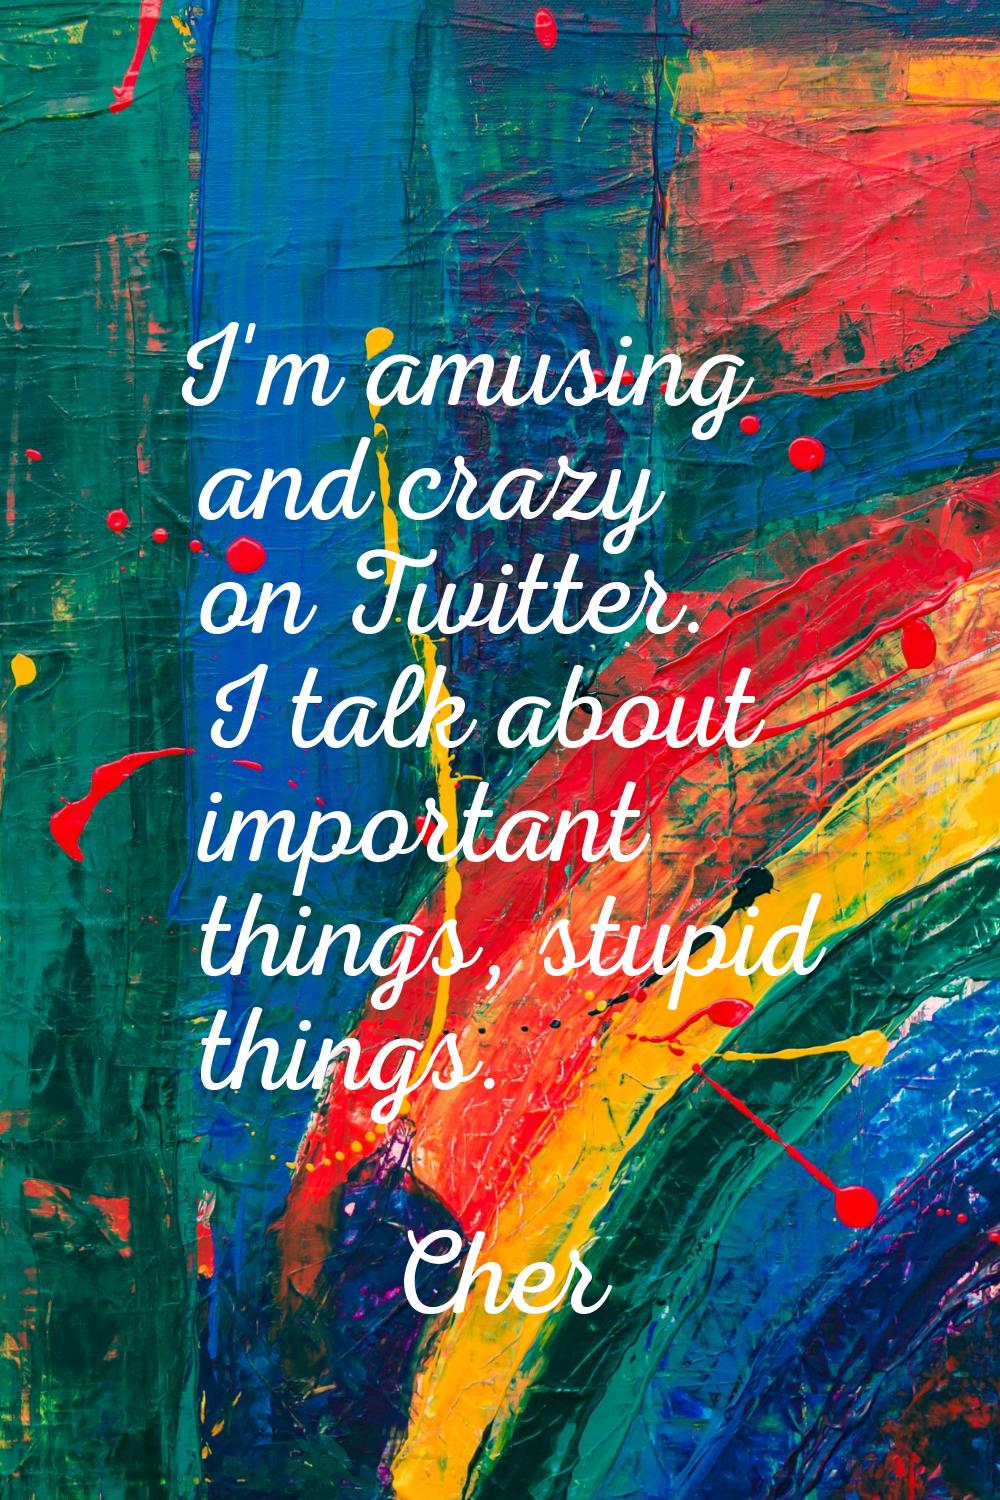 I'm amusing and crazy on Twitter. I talk about important things, stupid things.